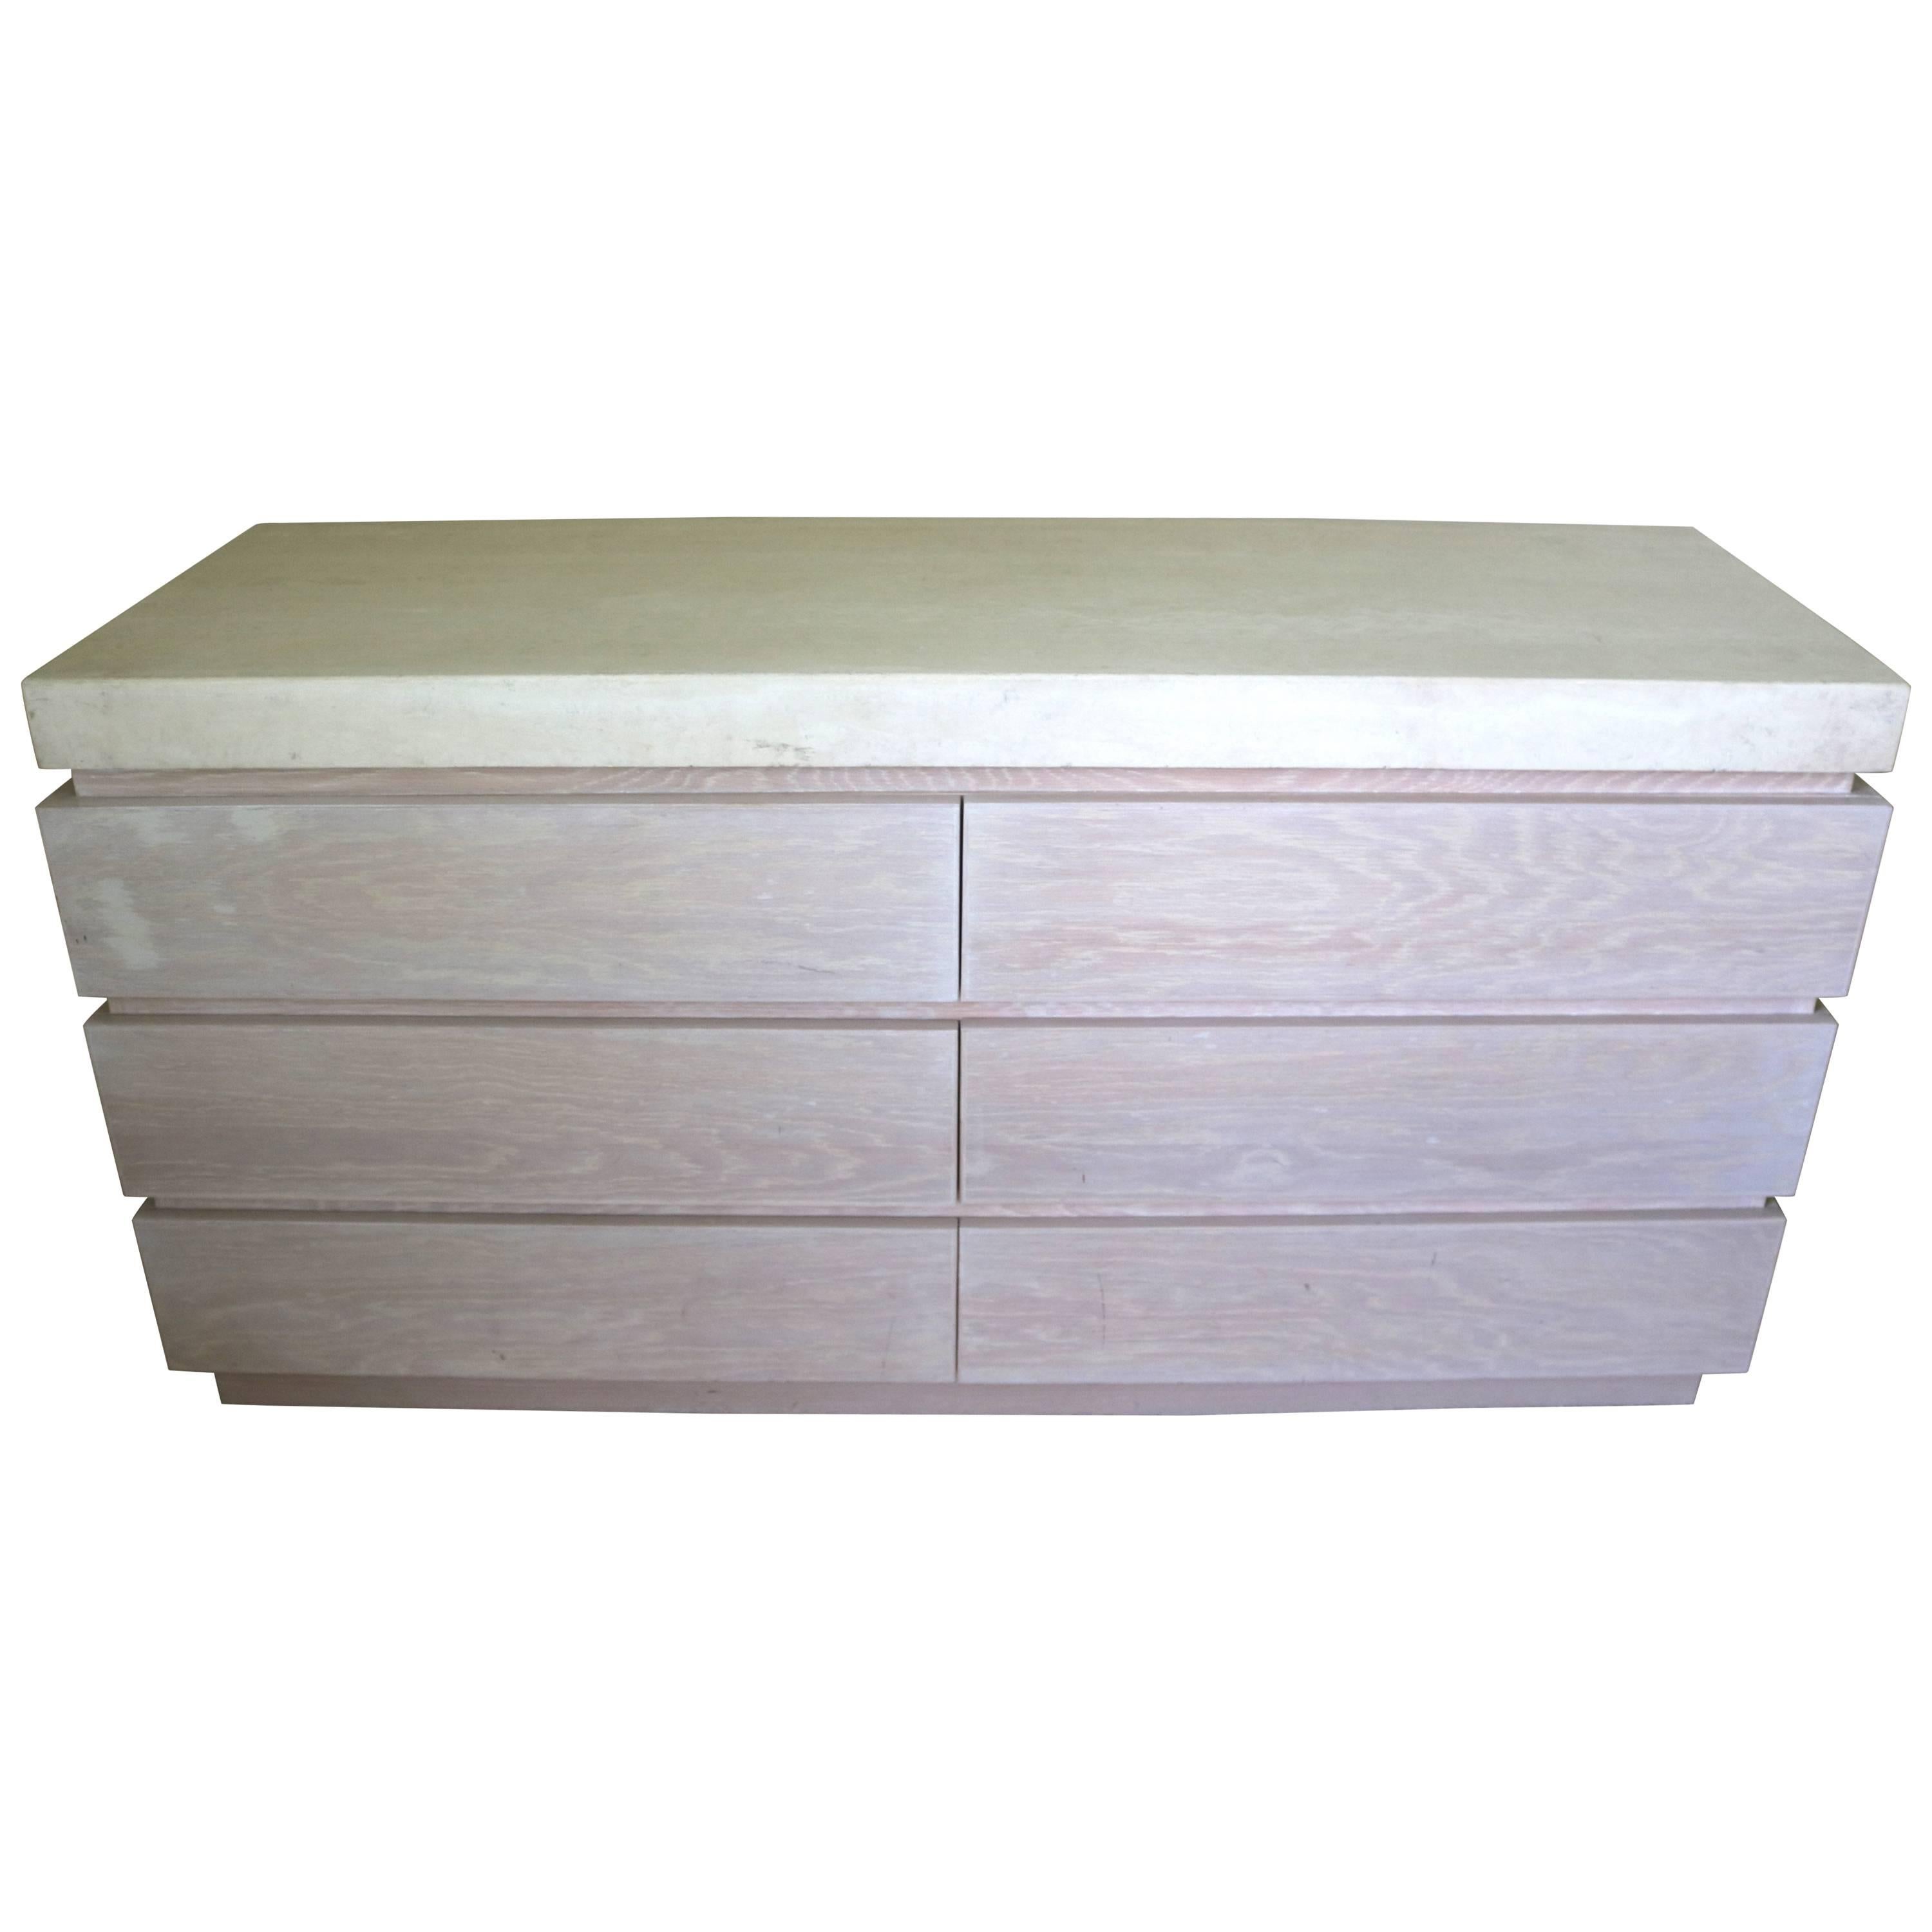 Six-Drawer Chest of Drawers in Cerused Oak with a Stone Top